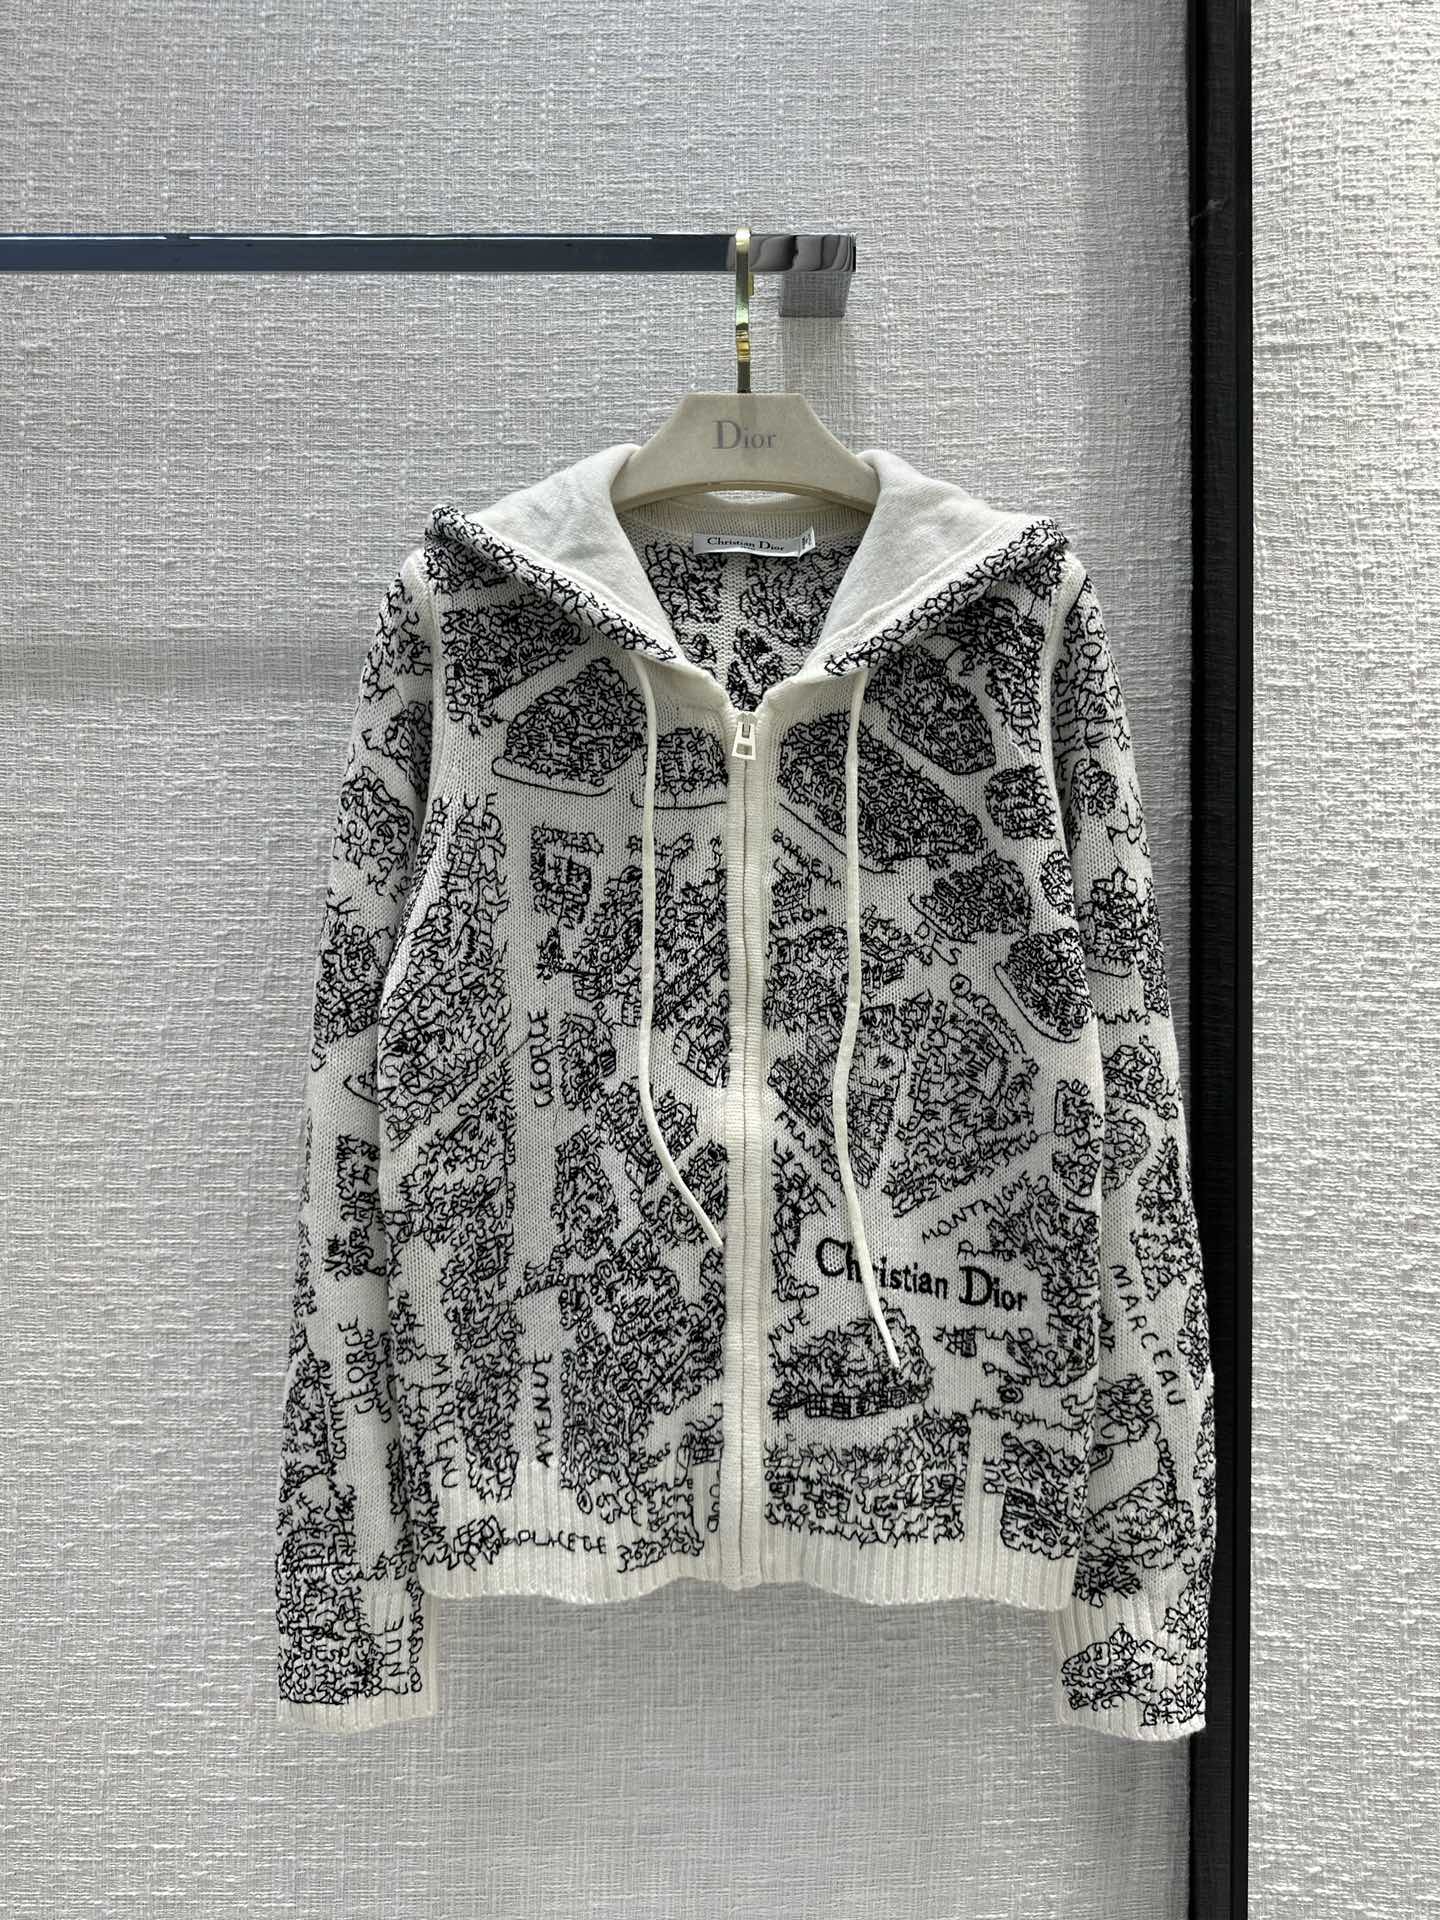 Shop the Best High Authentic Quality Replica
 Dior Clothing Cardigans Knit Sweater White Embroidery Cashmere Knitting Wool Spring Collection Hooded Top